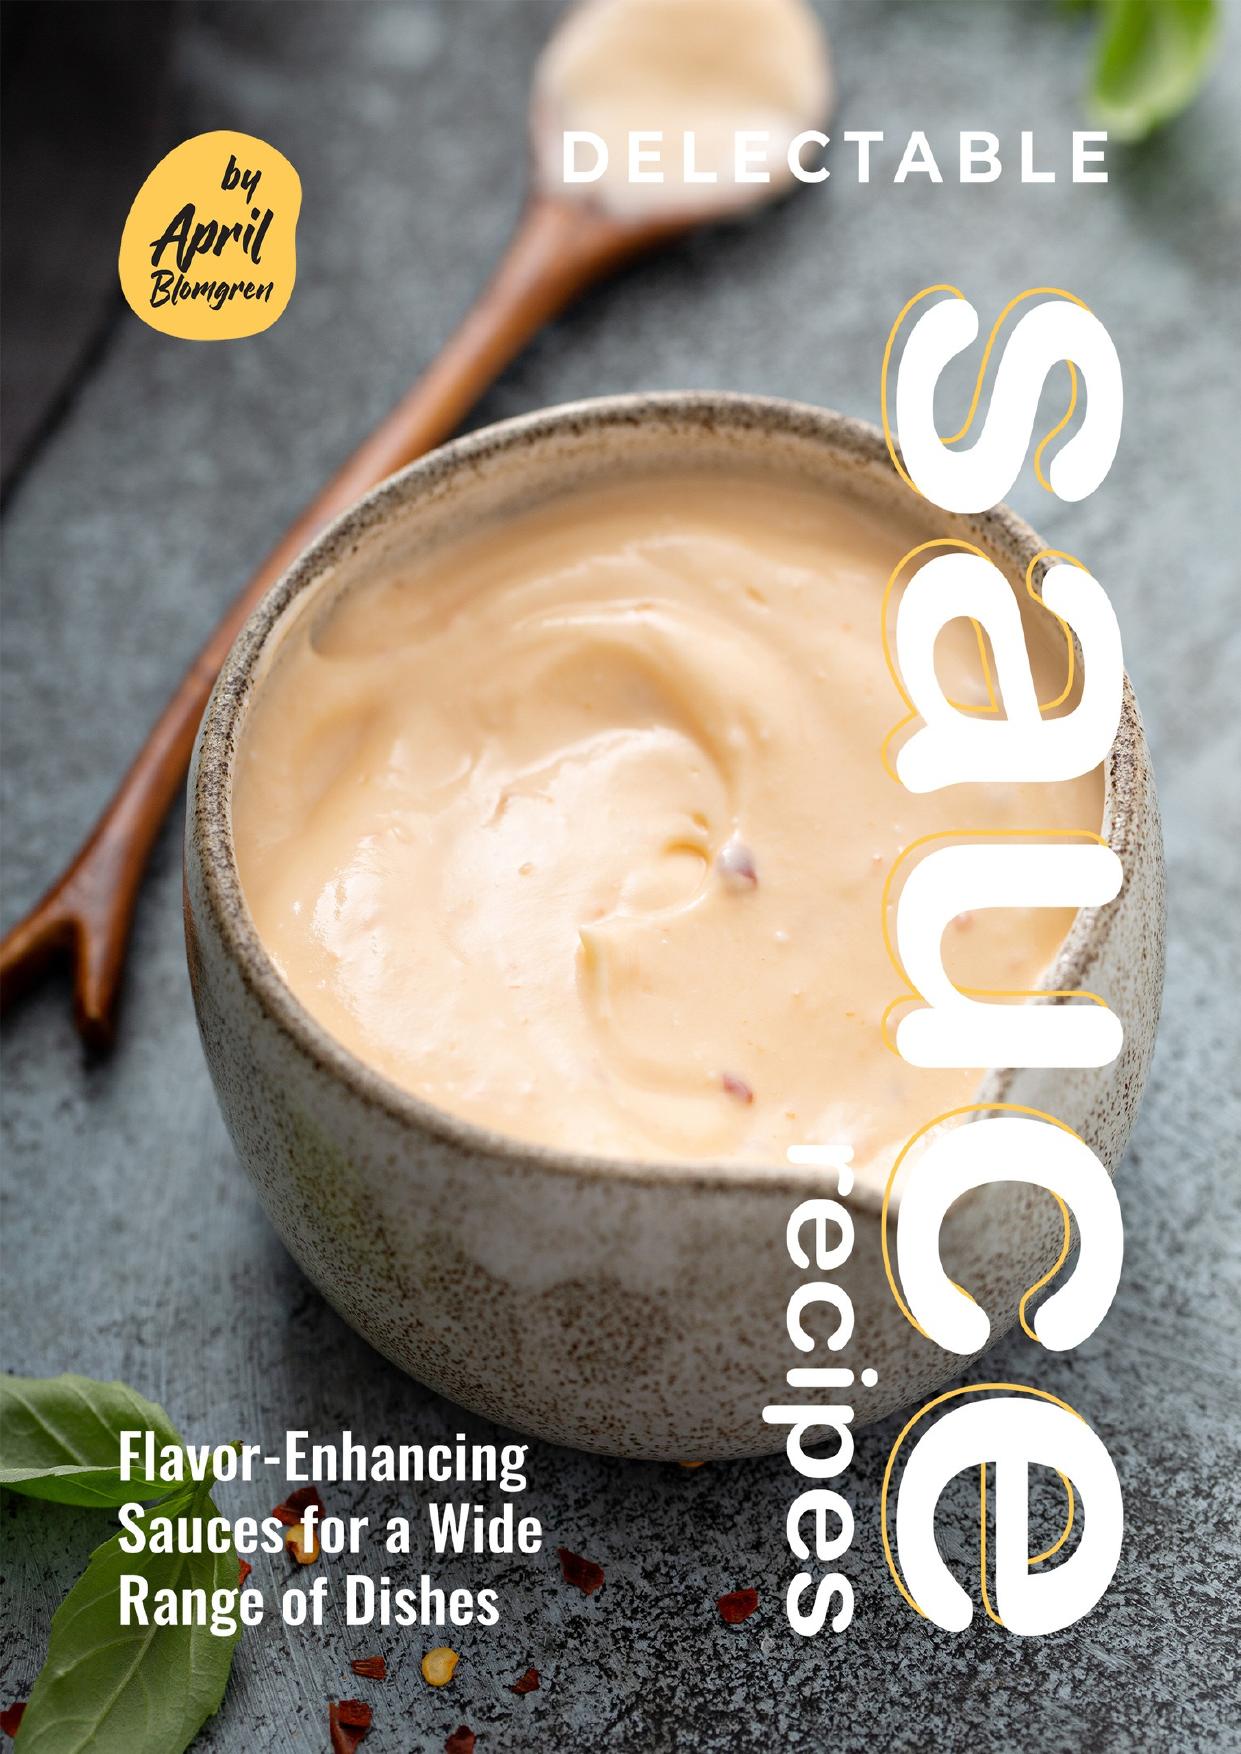 Delectable Sauce Recipes: Flavor-Enhancing Sauces for a Wide Range of Dishes by Blomgren April